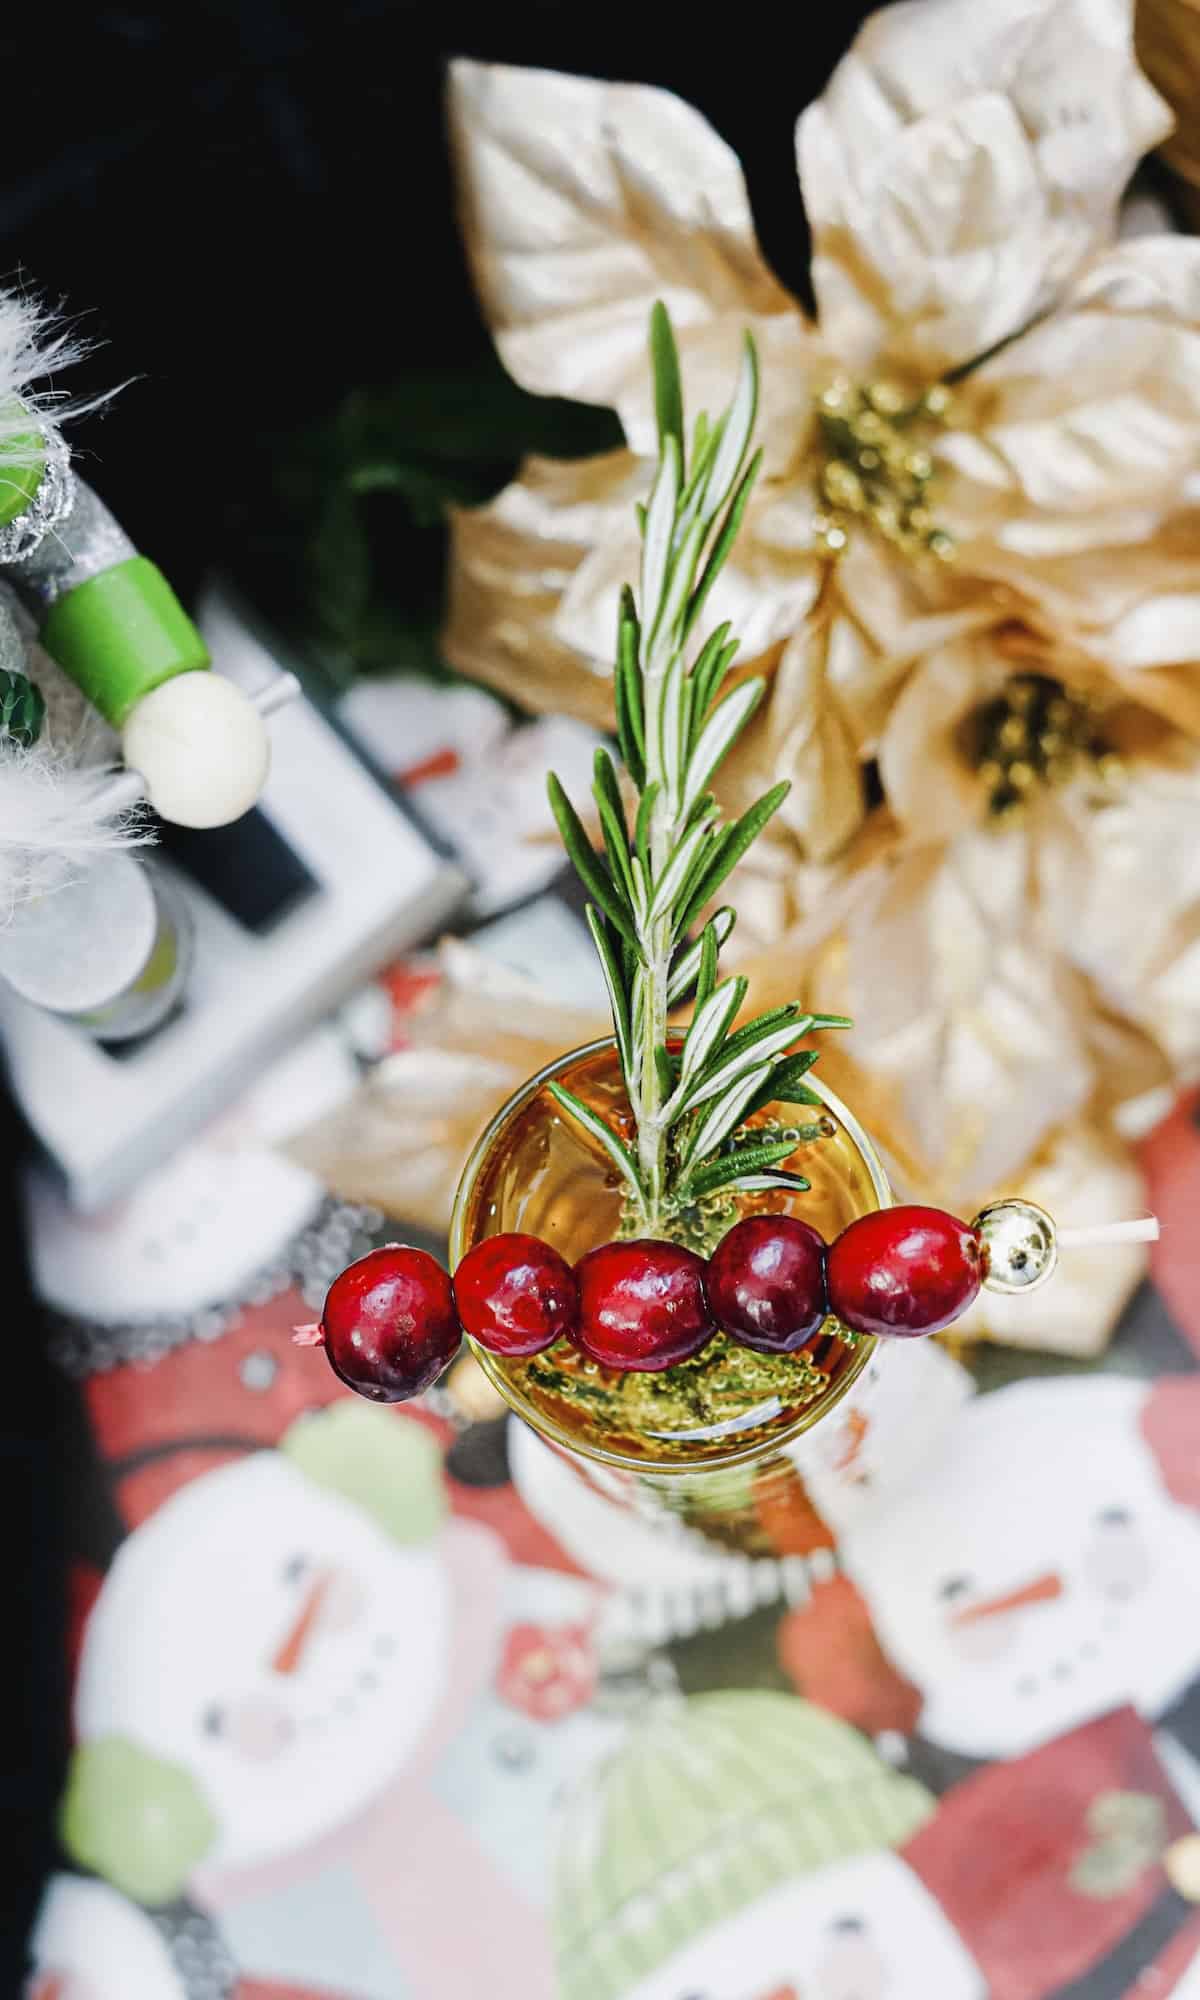 Mimosa cocktail in fluted glass with fresh cranberries with green nutcracker and gold flowers in background.